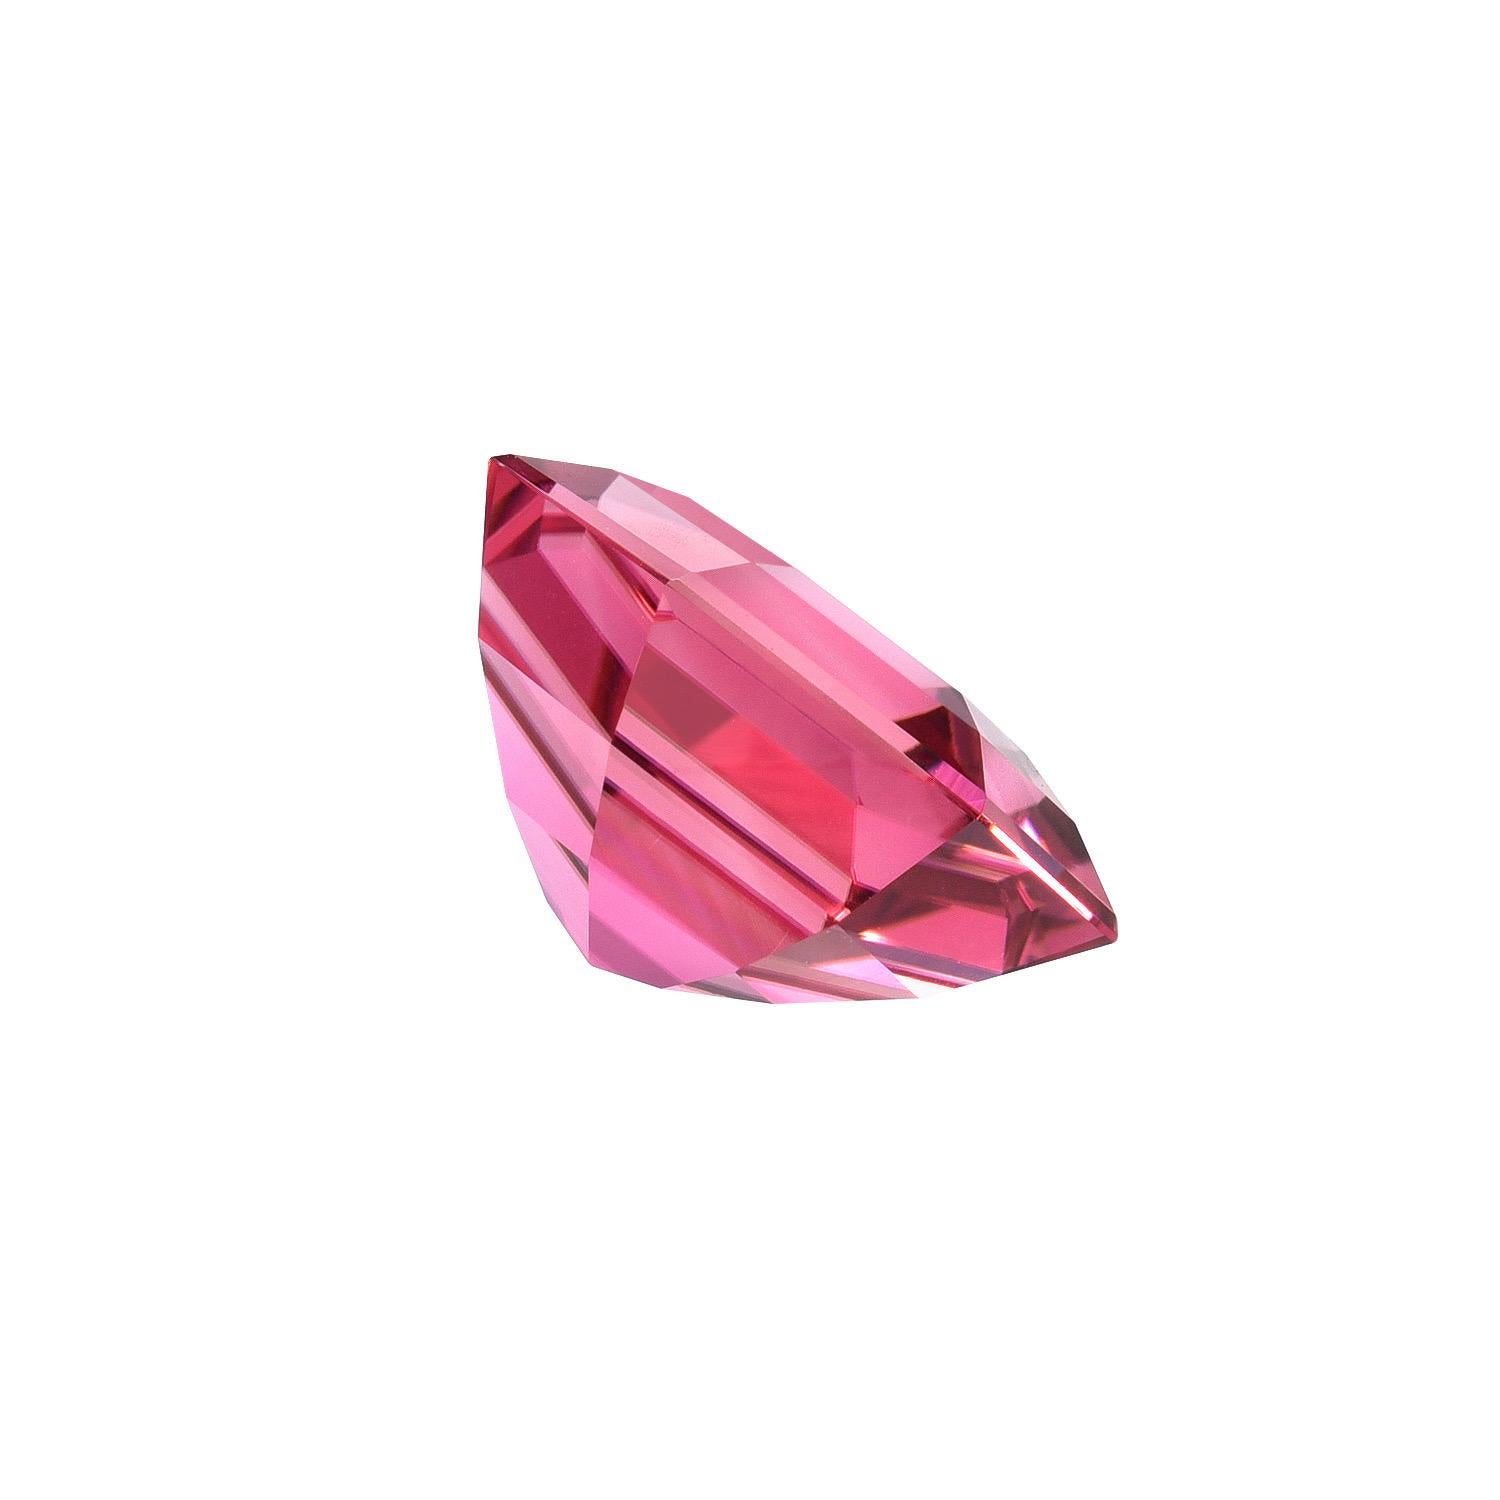 Ultra exclusive 5.50 carat unmounted Pink Tourmaline Hexagon gem offered loose to a remarkable gemstone collector.
Dimensions: 11.54 x 11.40 mm.
Returns are accepted and paid by us within 7 days of delivery.
We offer supreme custom jewelry work upon